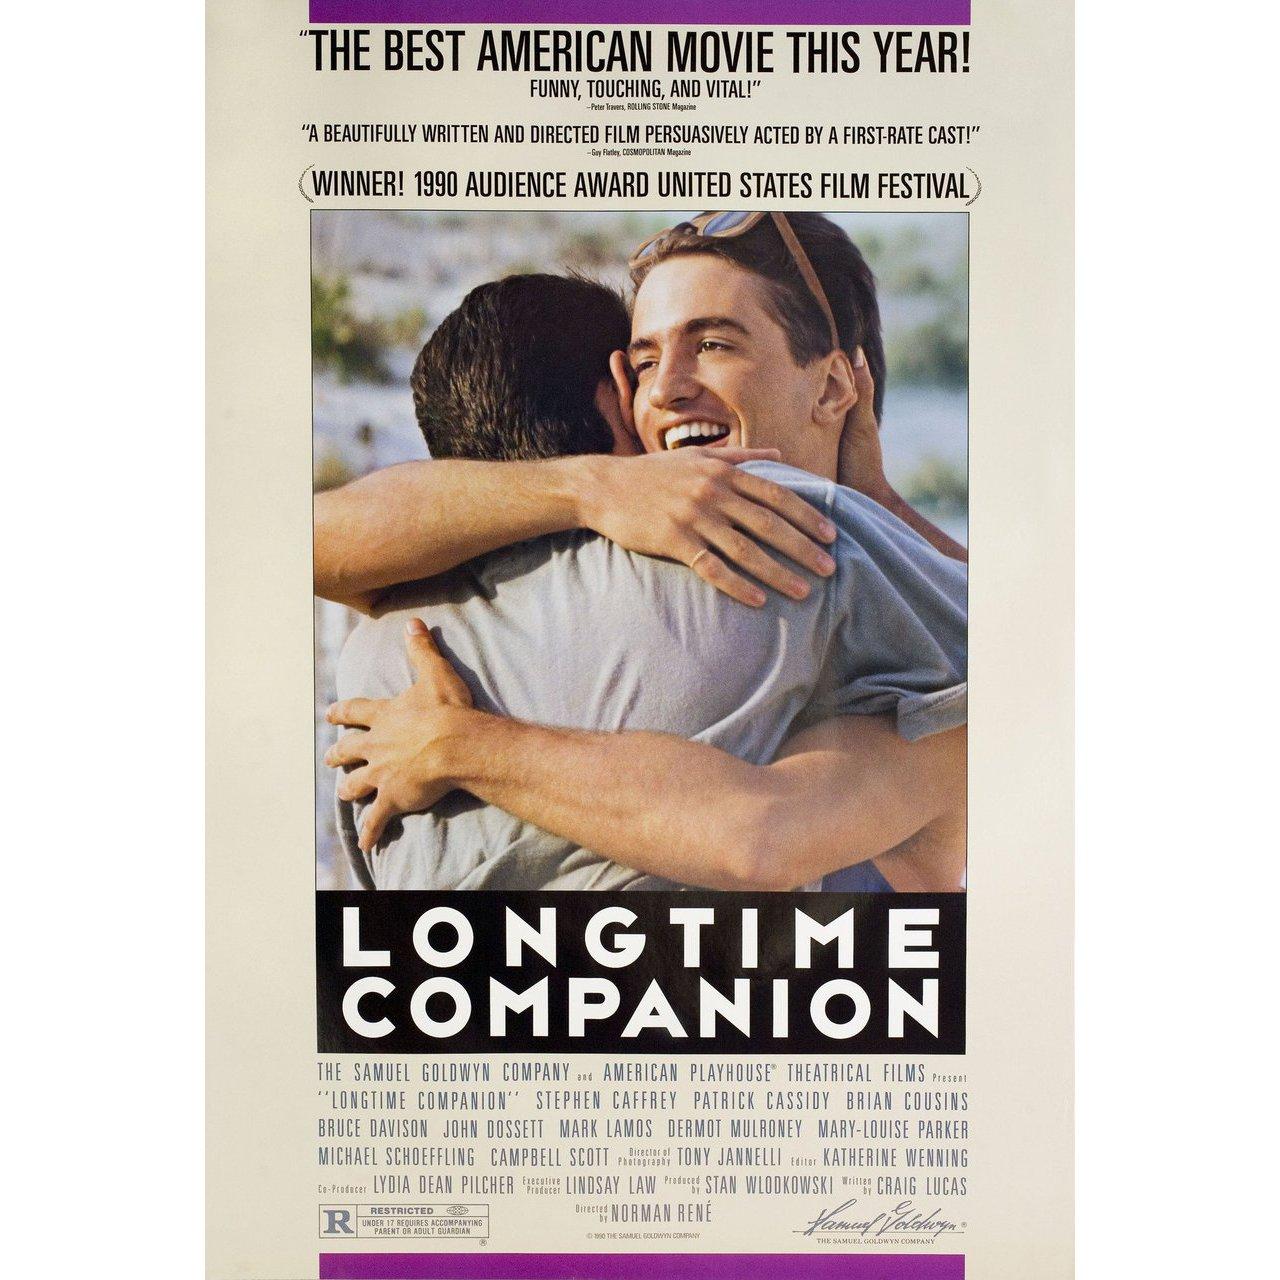 Original 1990 U.S. one sheet poster for the film Longtime Companion directed by Norman Rene with Campbell Scott / Patrick Cassidy / John Dossett / Mary-Louise Parker. Very good-fine condition, rolled. Please note: the size is stated in inches and